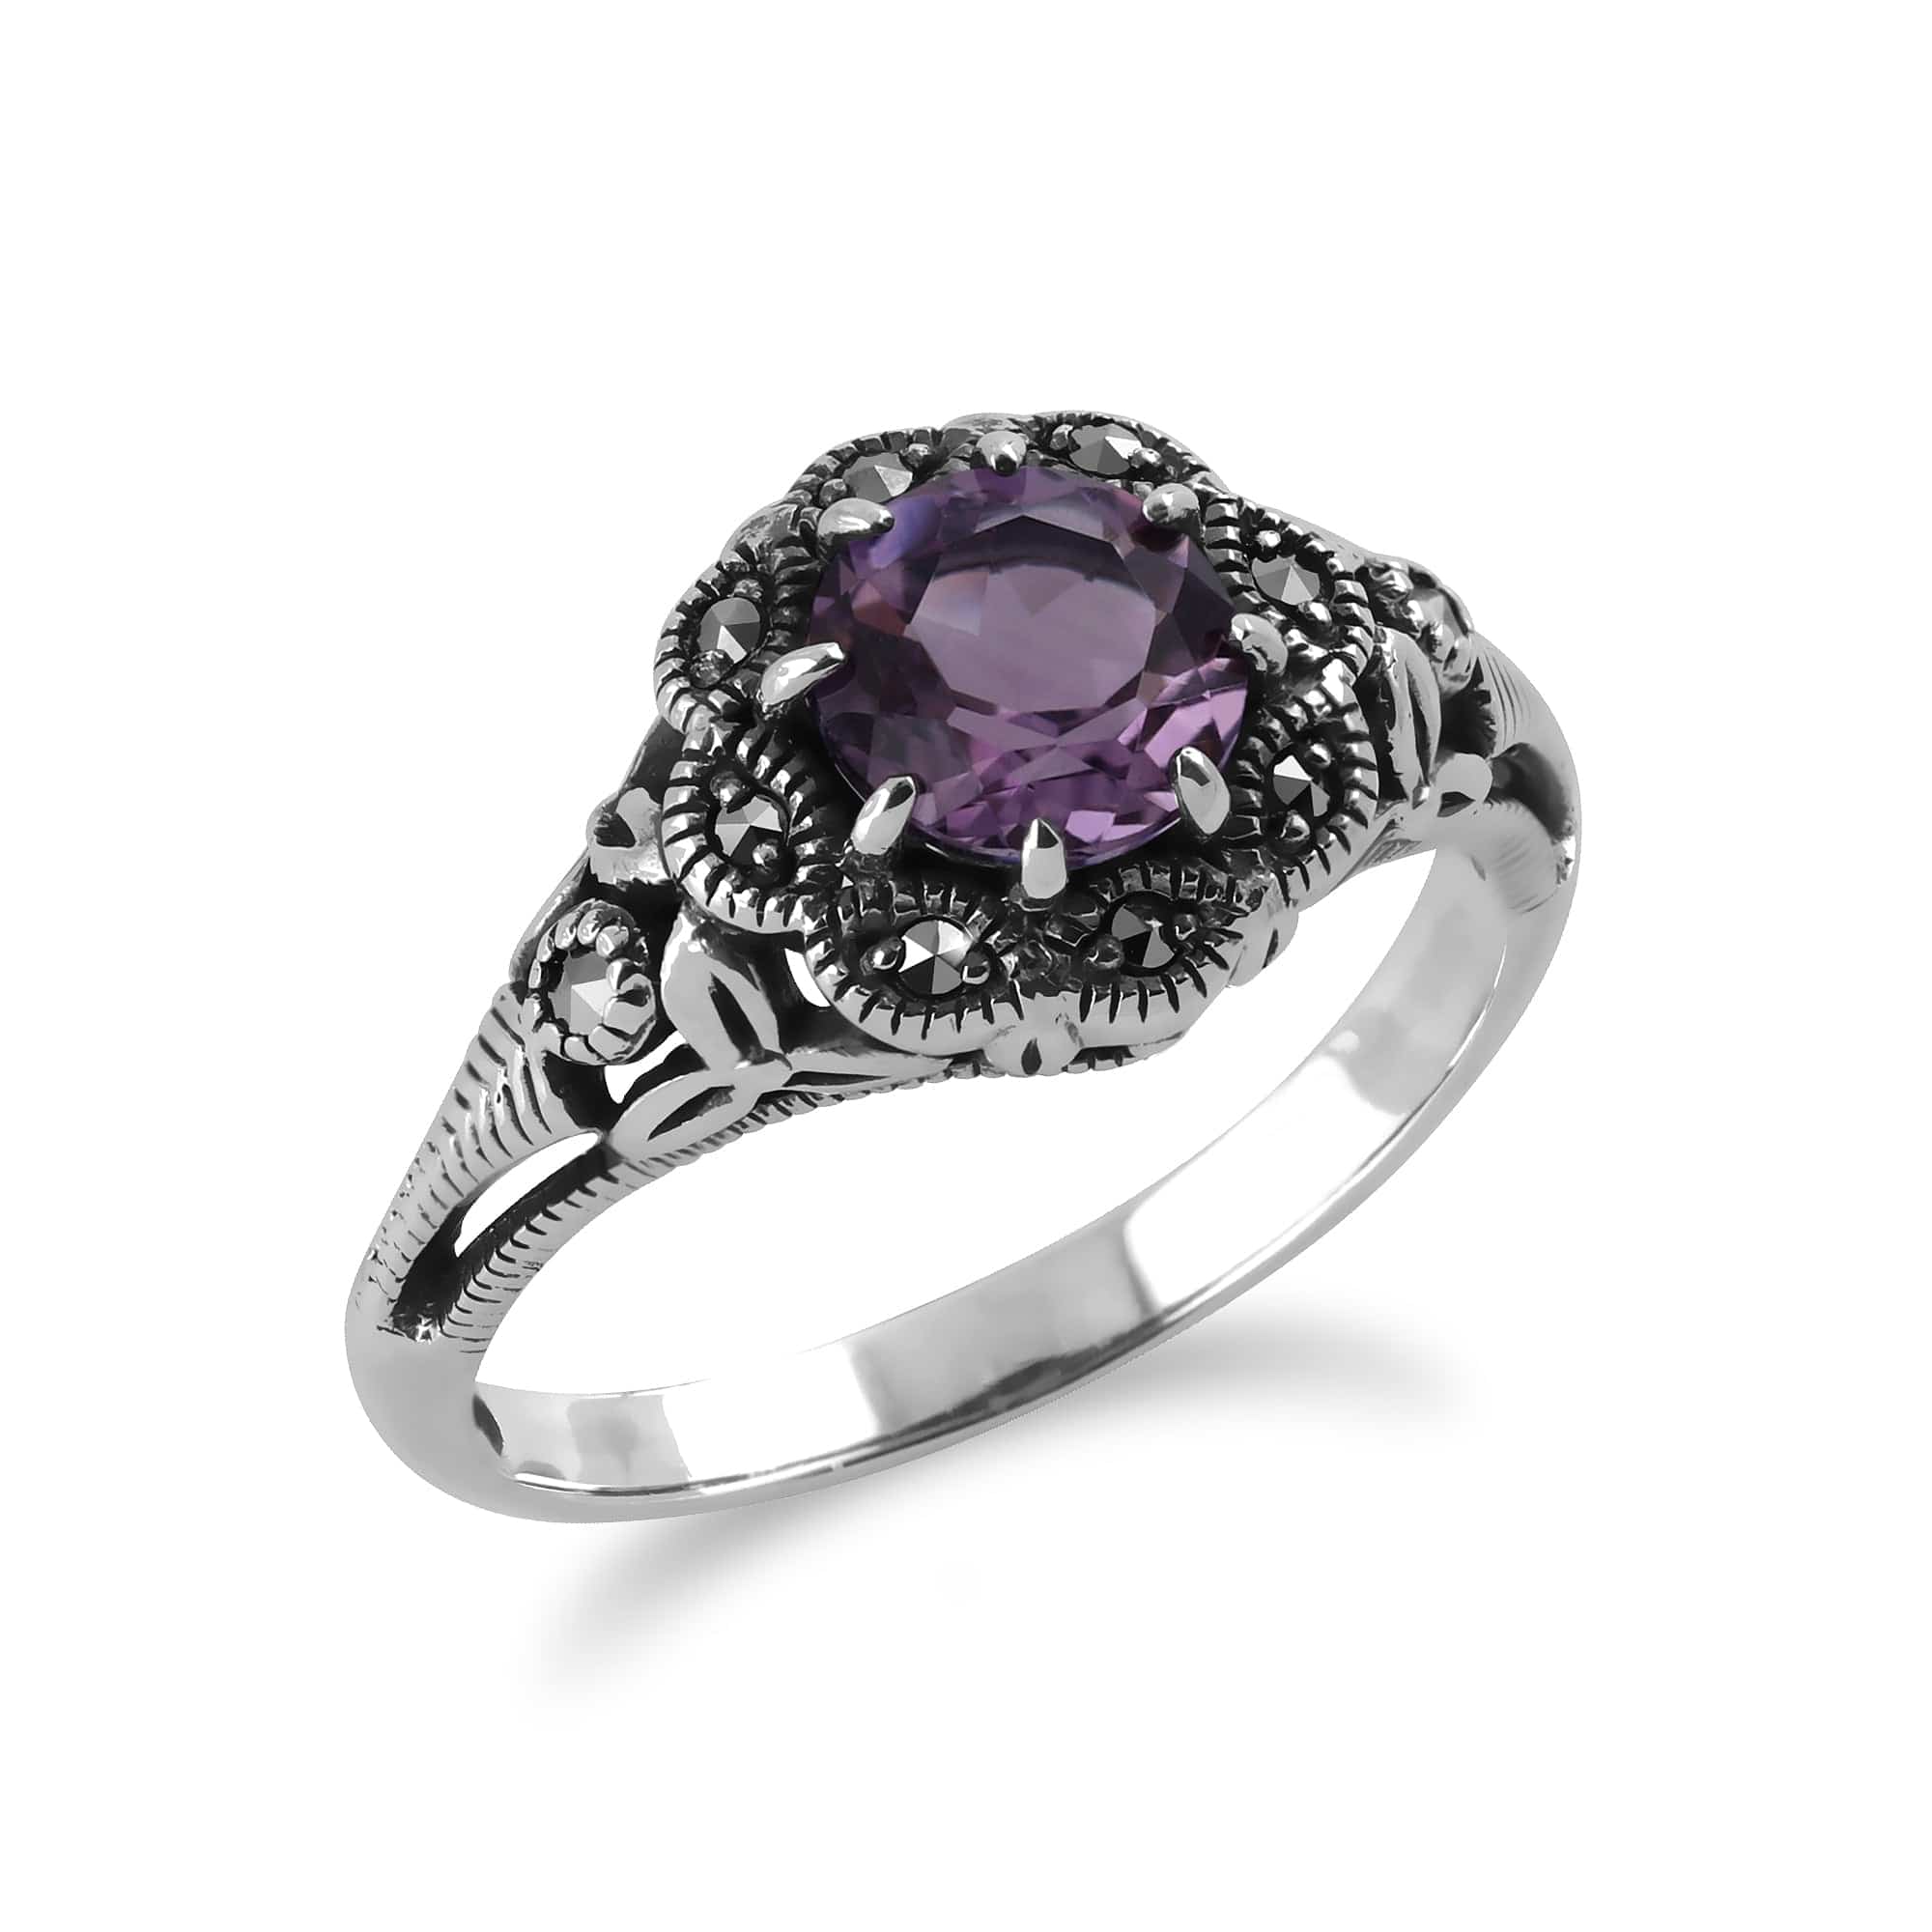 214R524702925 Art Nouveau Style Round Amethyst & Marcasite Floral Ring in Sterling Silver 2